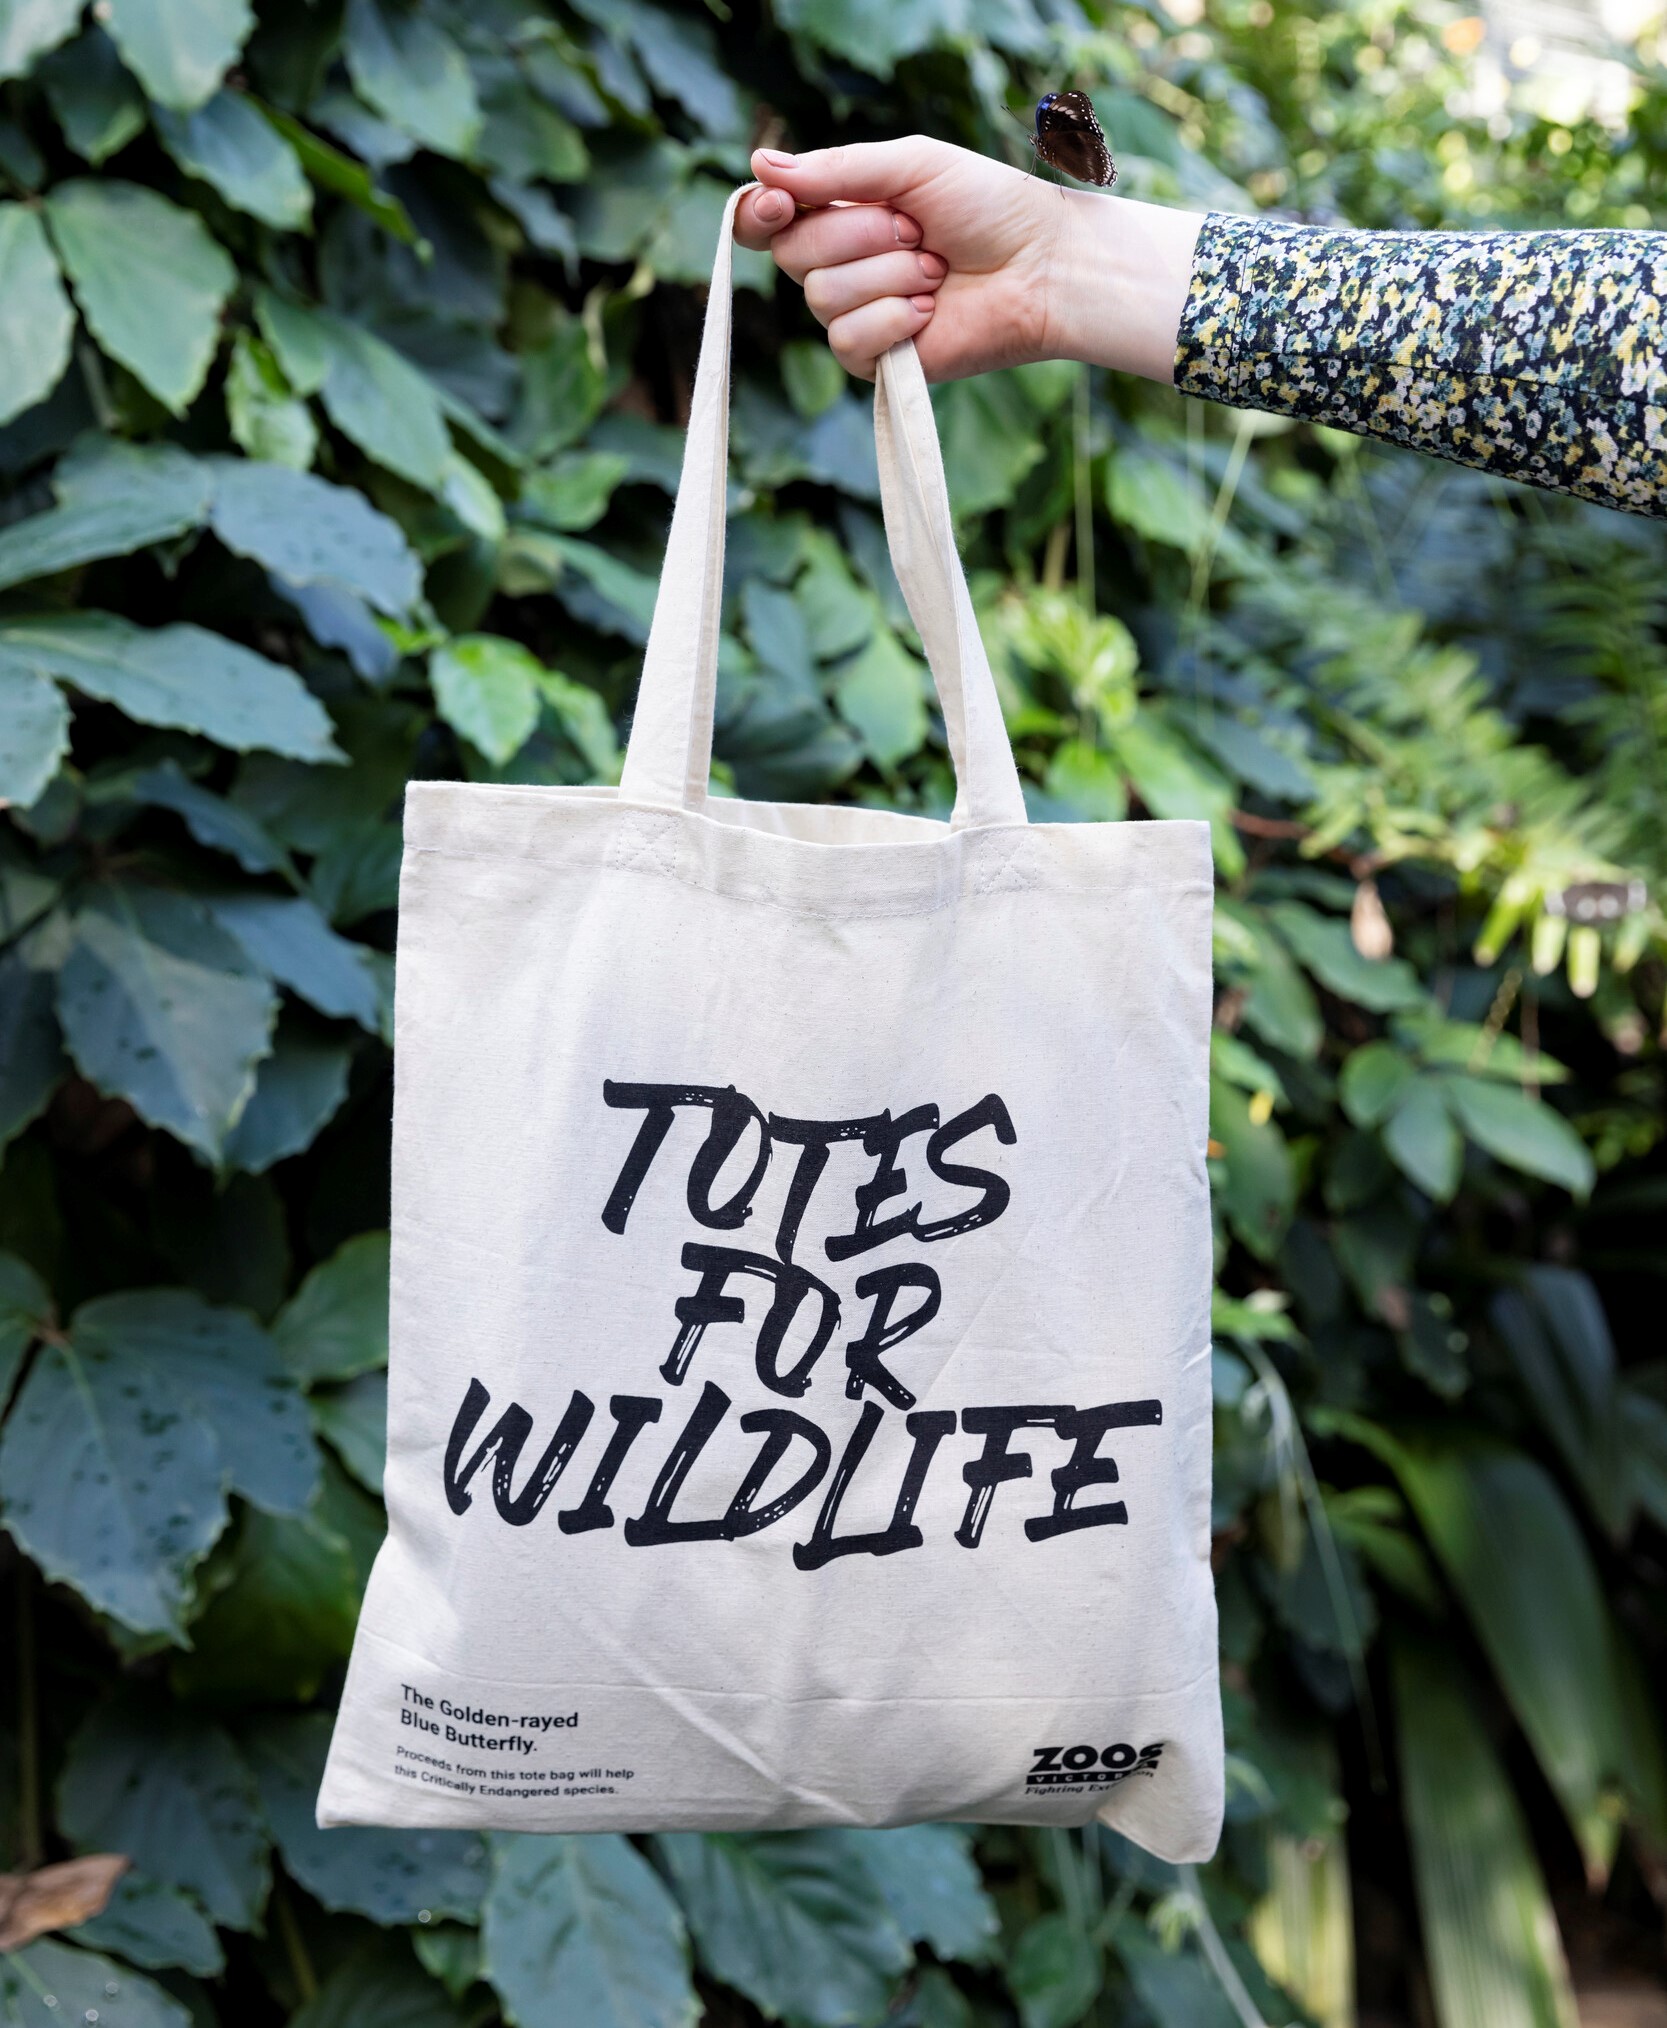 A hand holding a calico tote bag that says "Tote for Wildlife"